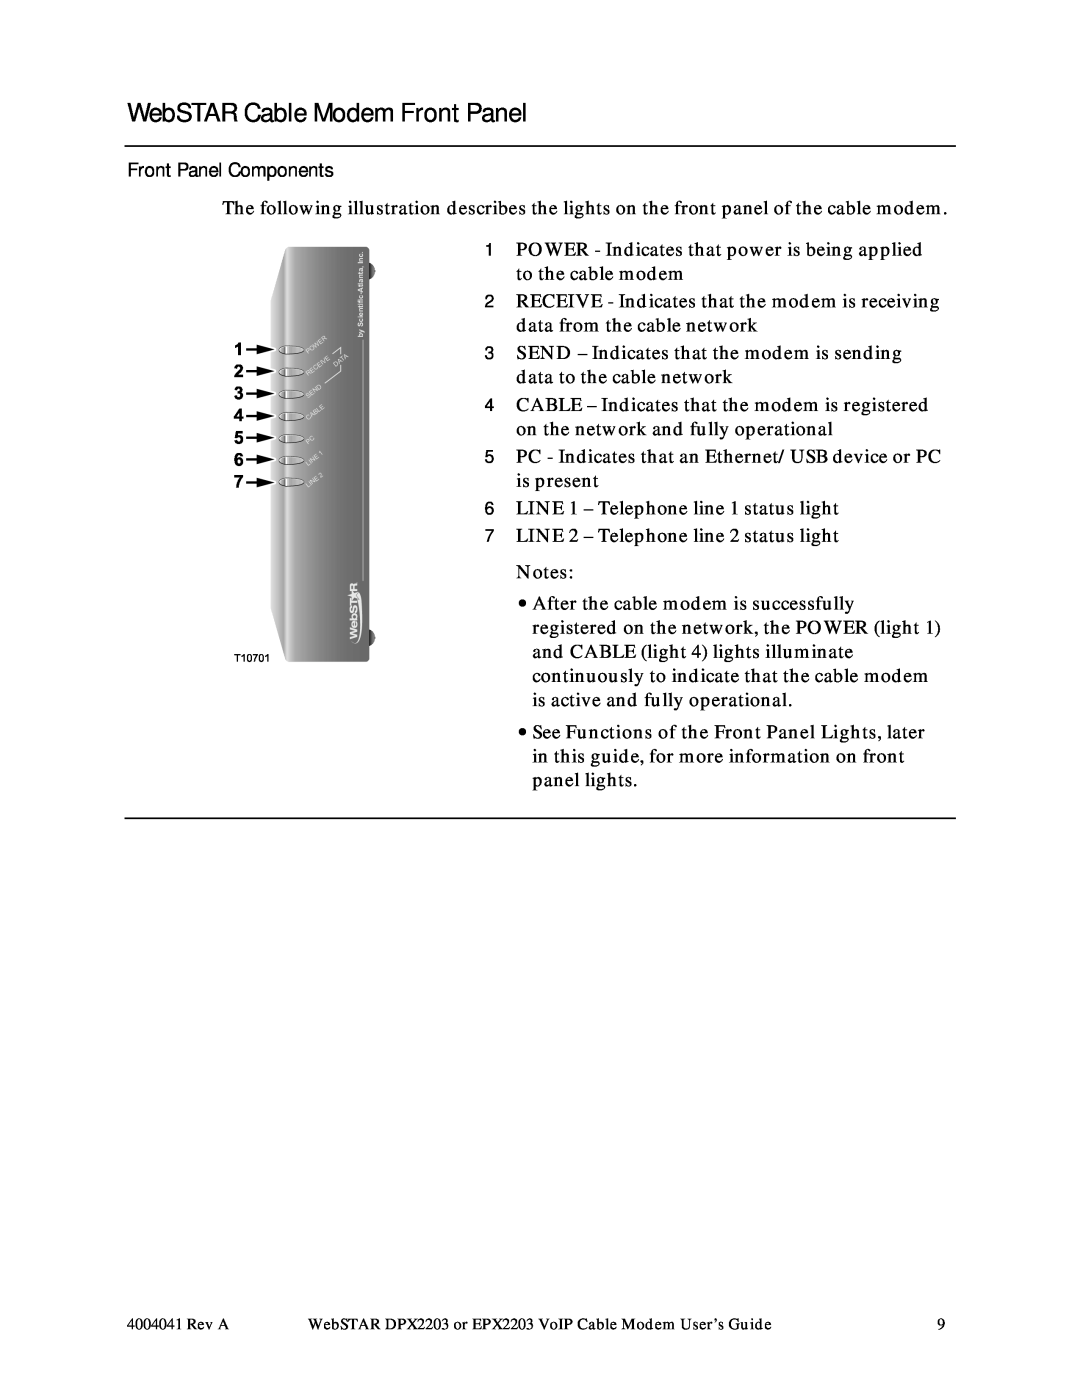 Scientific Atlanta DPX2203, EPX2203 manual WebSTAR Cable Modem Front Panel, Front Panel Components 